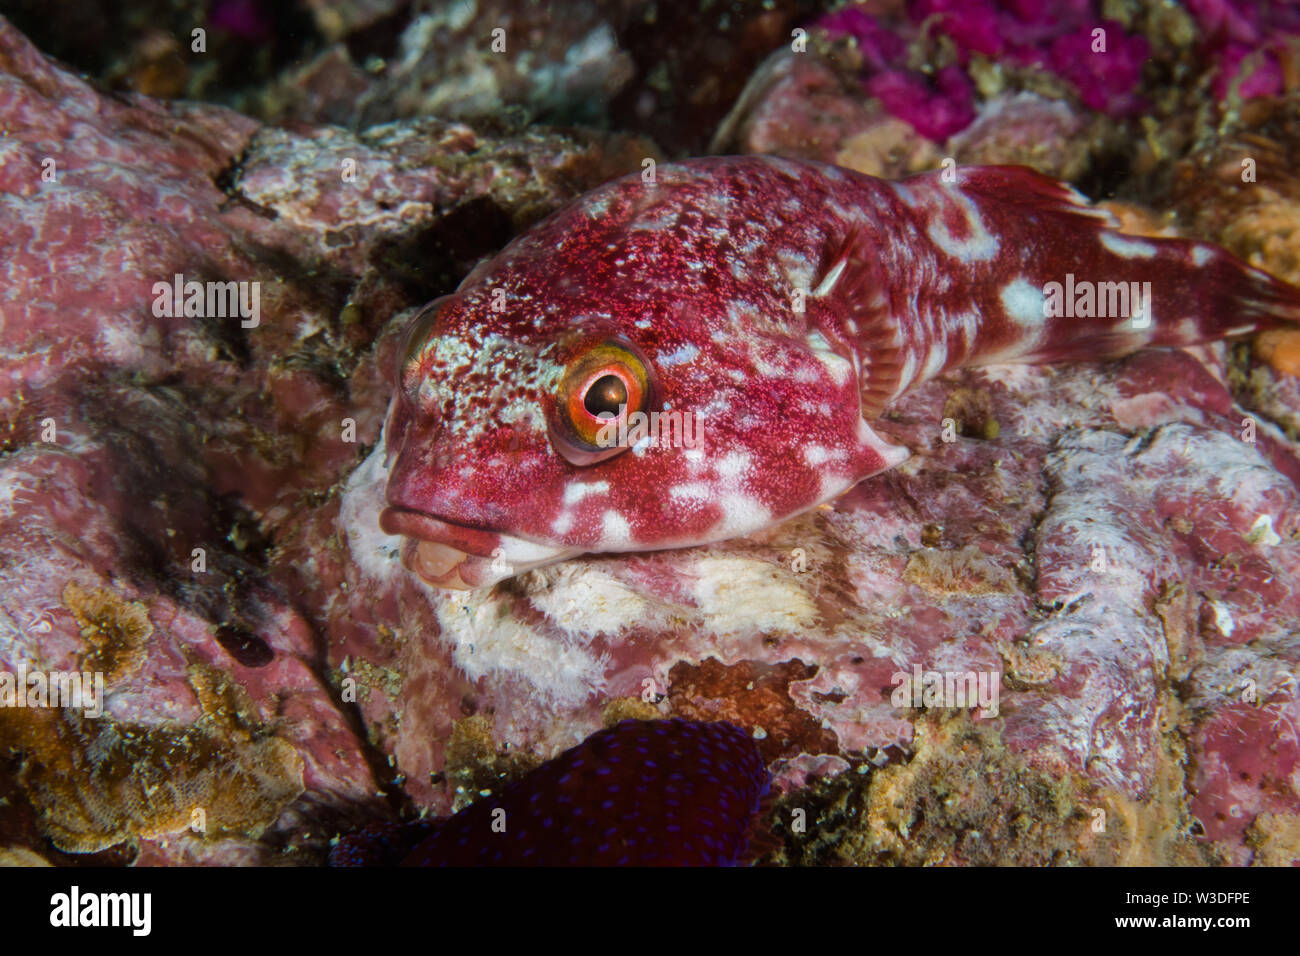 Rocksucker or giant clingfish (Chorisochismus dentex) on a rock closeup with sea urchin in foreground. Stock Photo